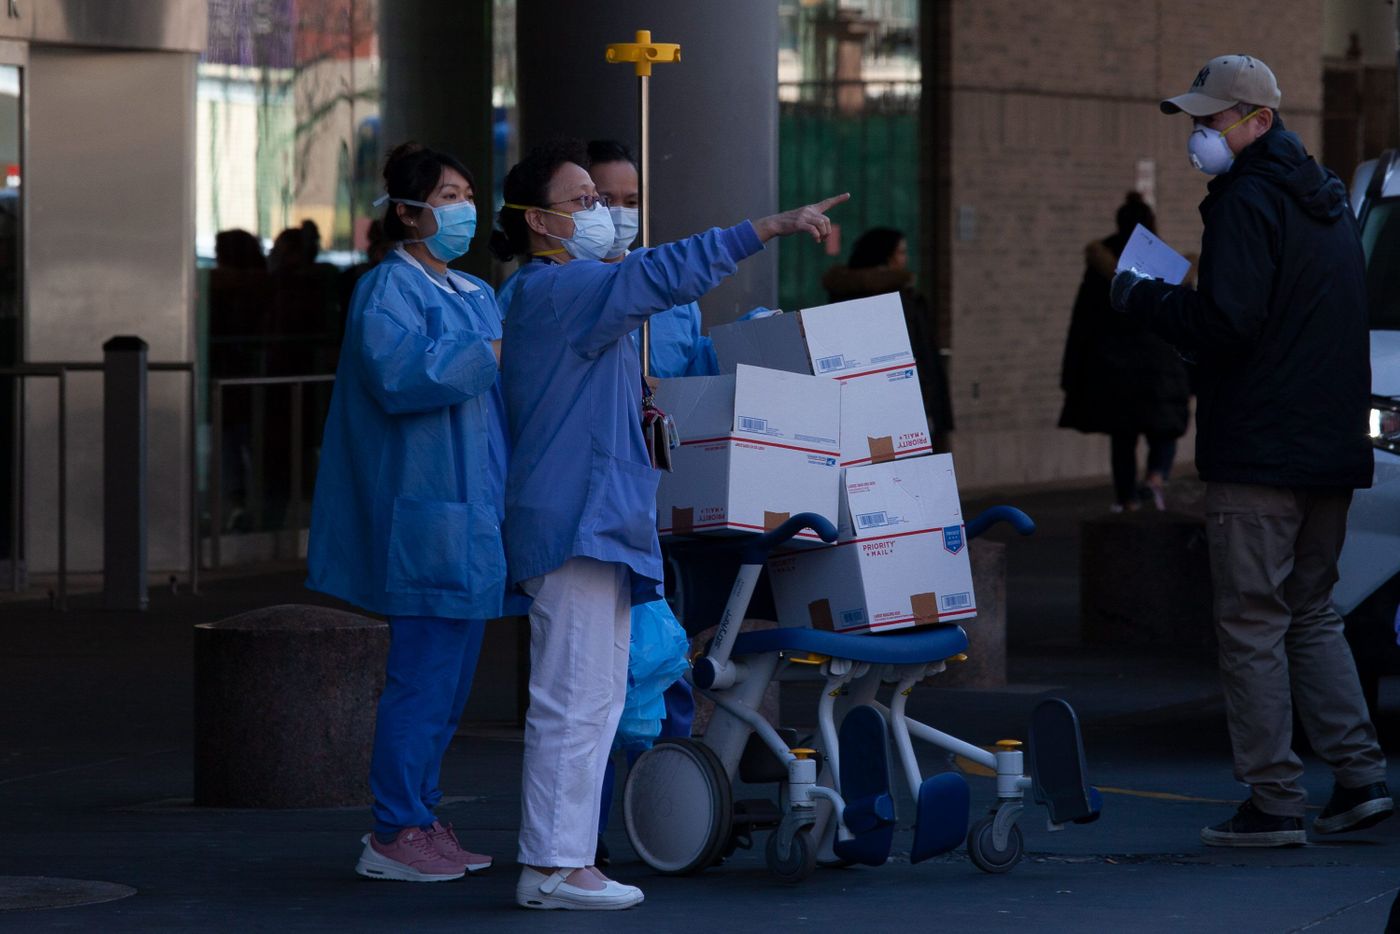 Bellevue Hospital workers accept several packages during the coronavirus outbreak, March 26, 2020.